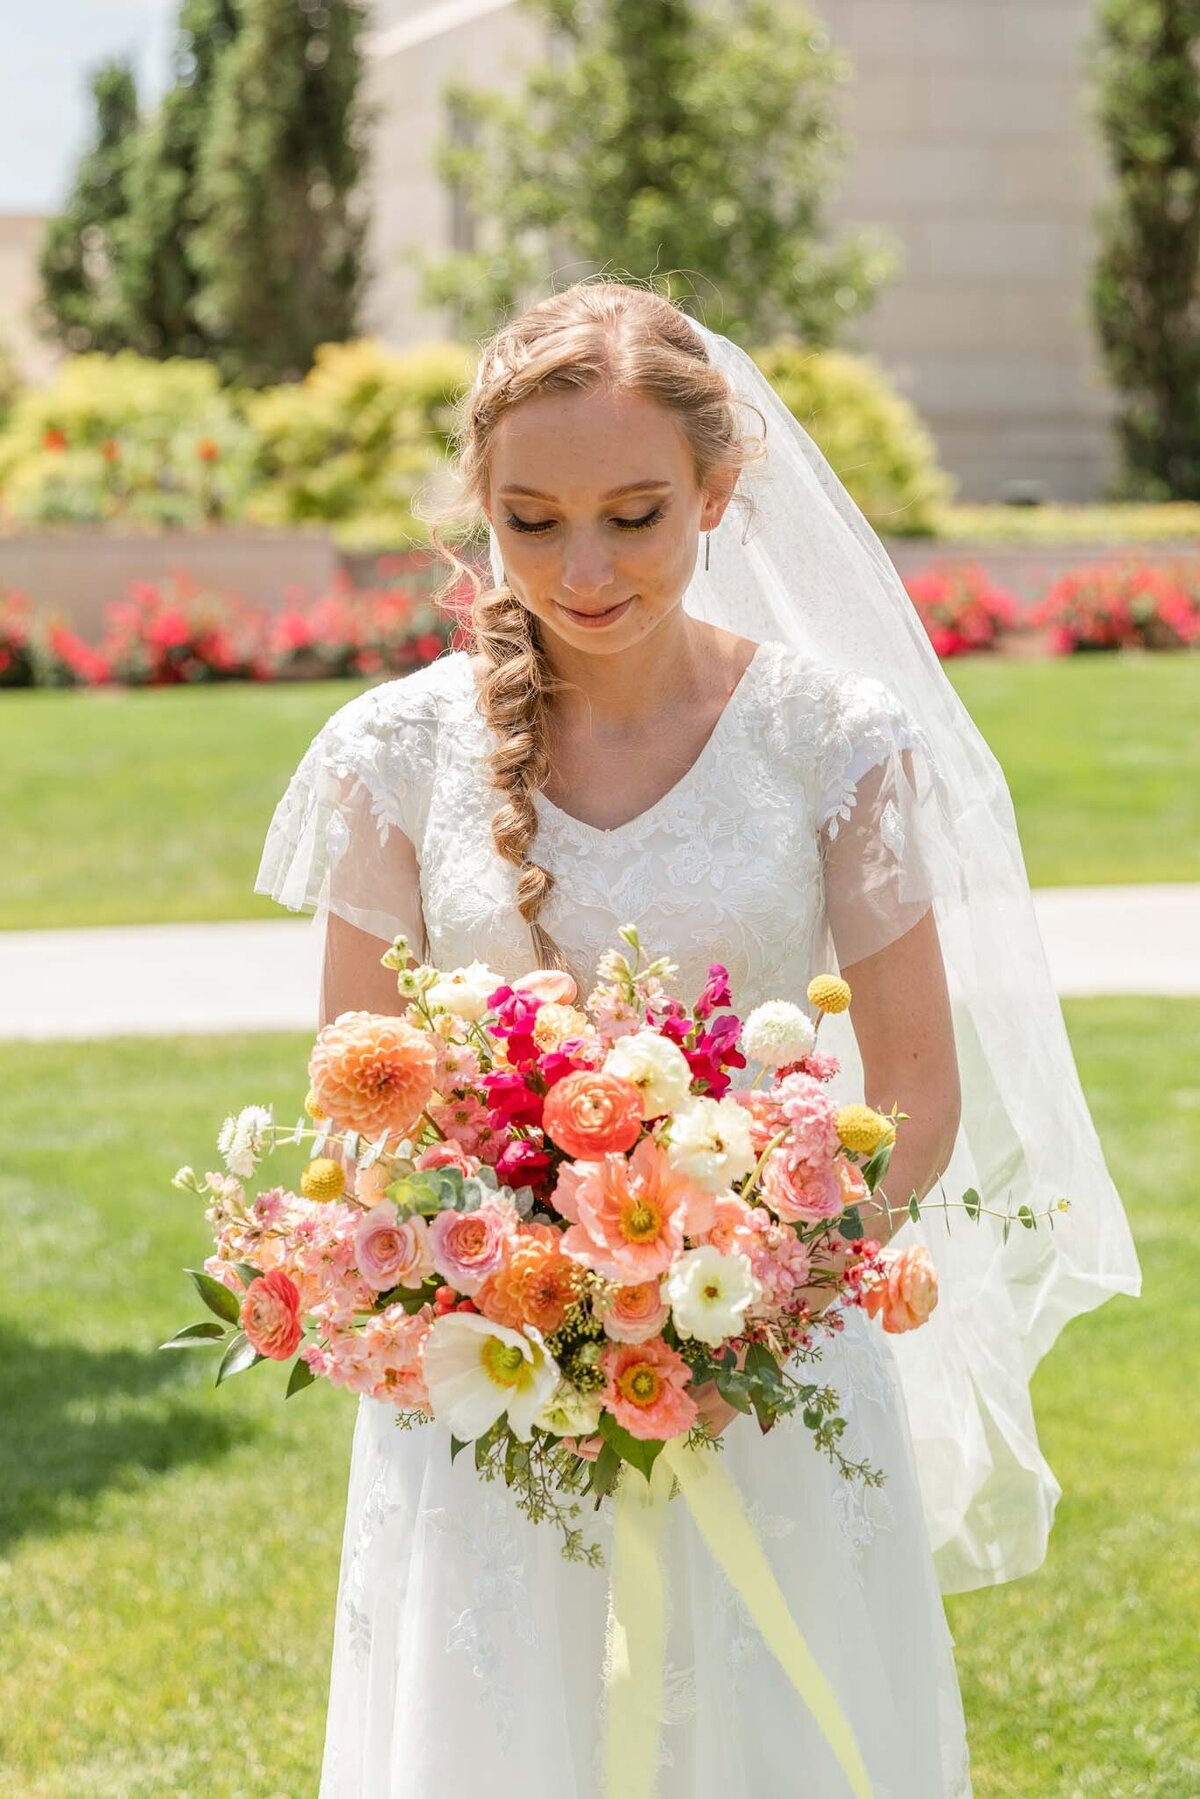 Bright and colorful wedding flowers for summer.